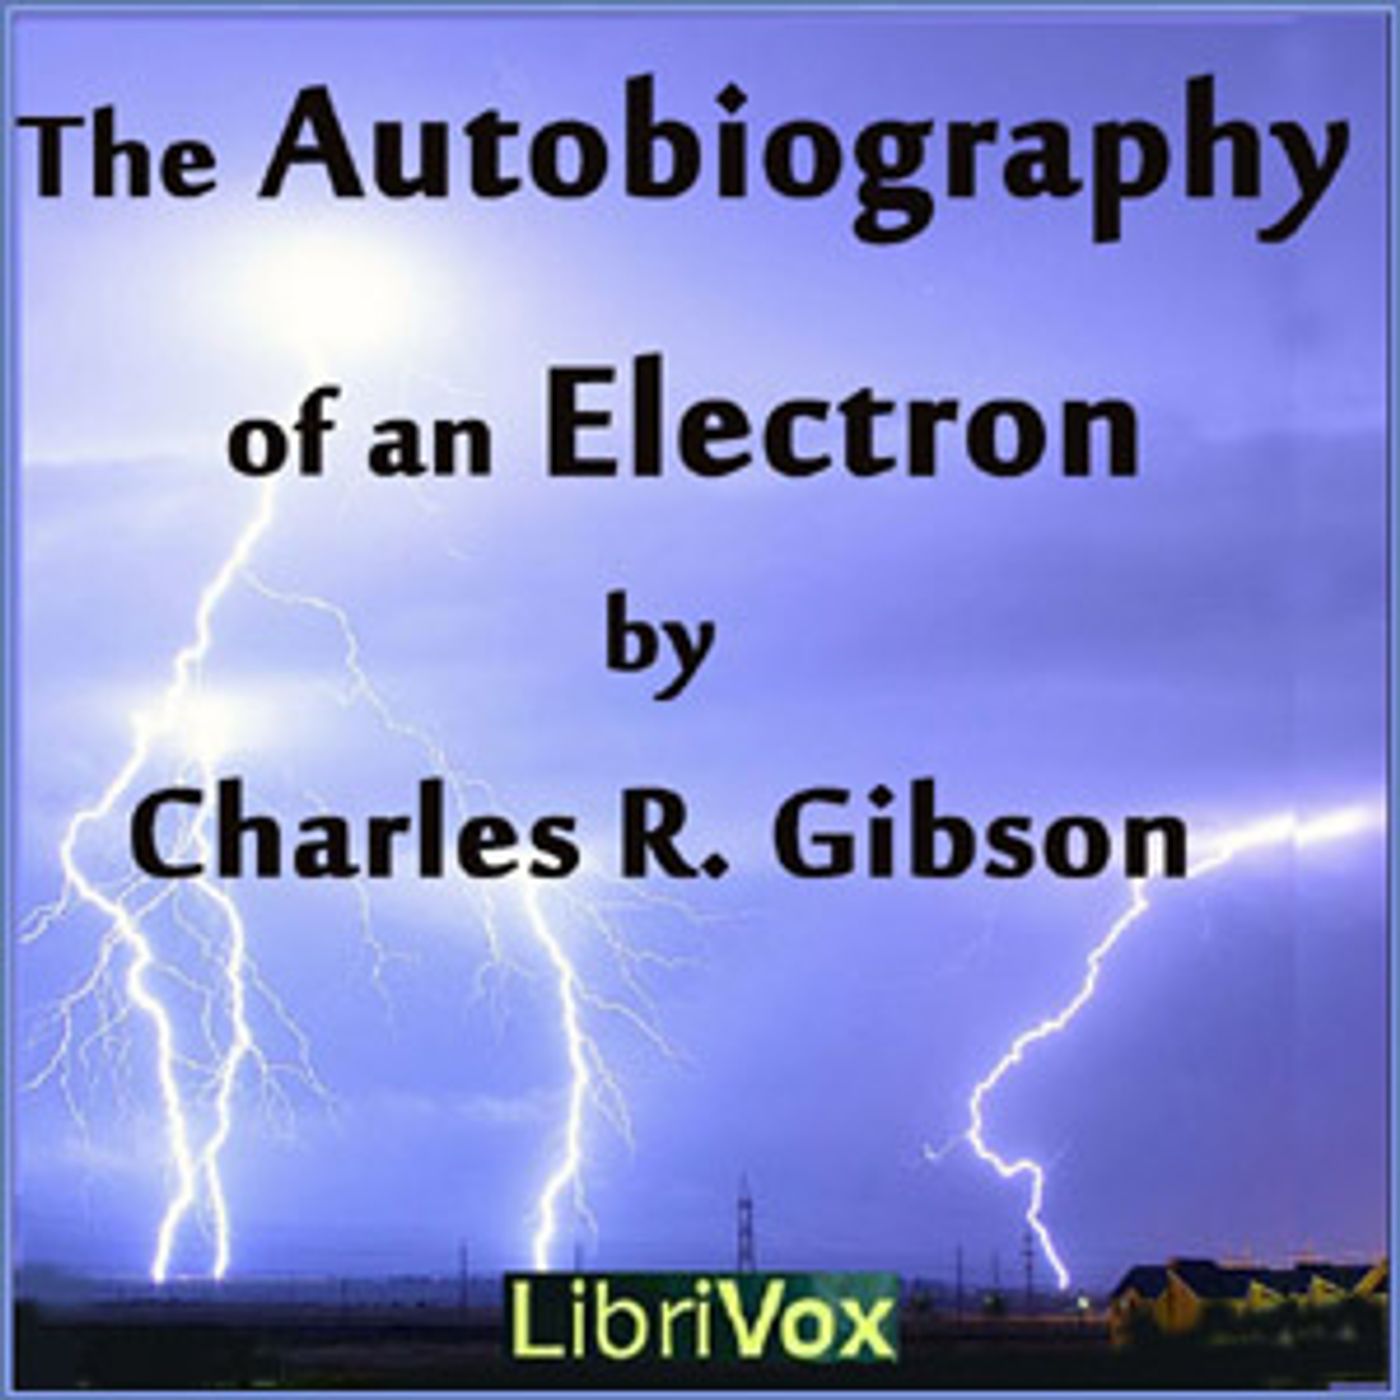 The Autobiography of an Electron, by Charles R. Gibson (1870 – 1931)